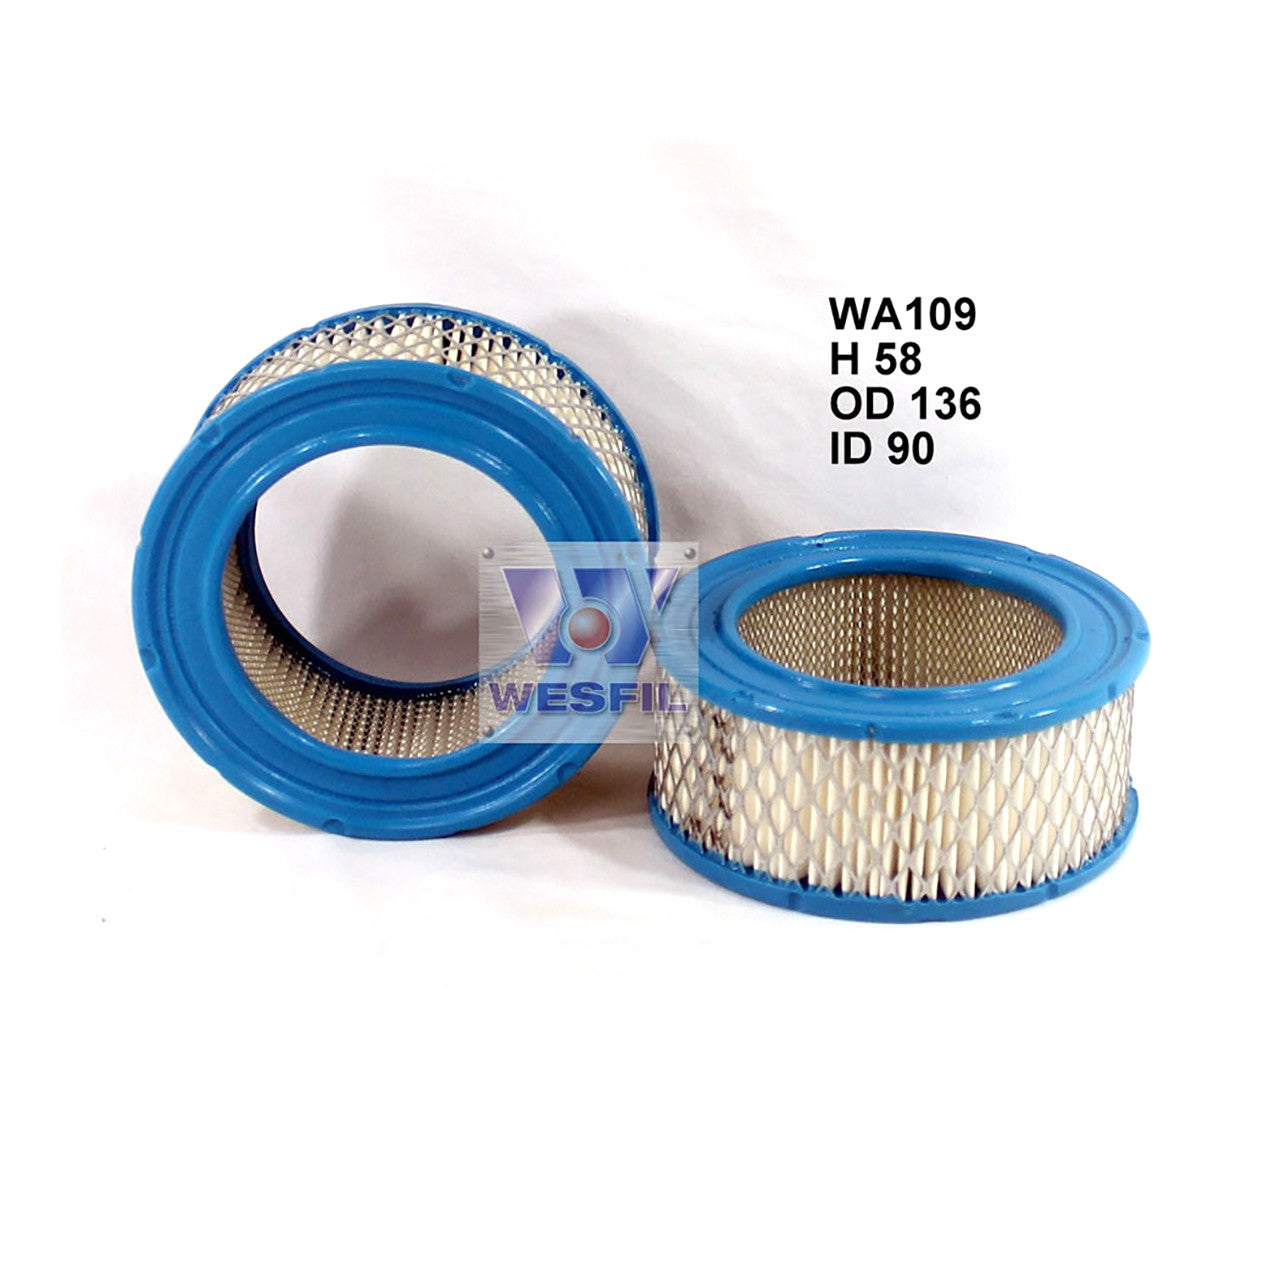 WA109 Wesfil Air Filter for Holden Leyland (Cross Ref: A109)